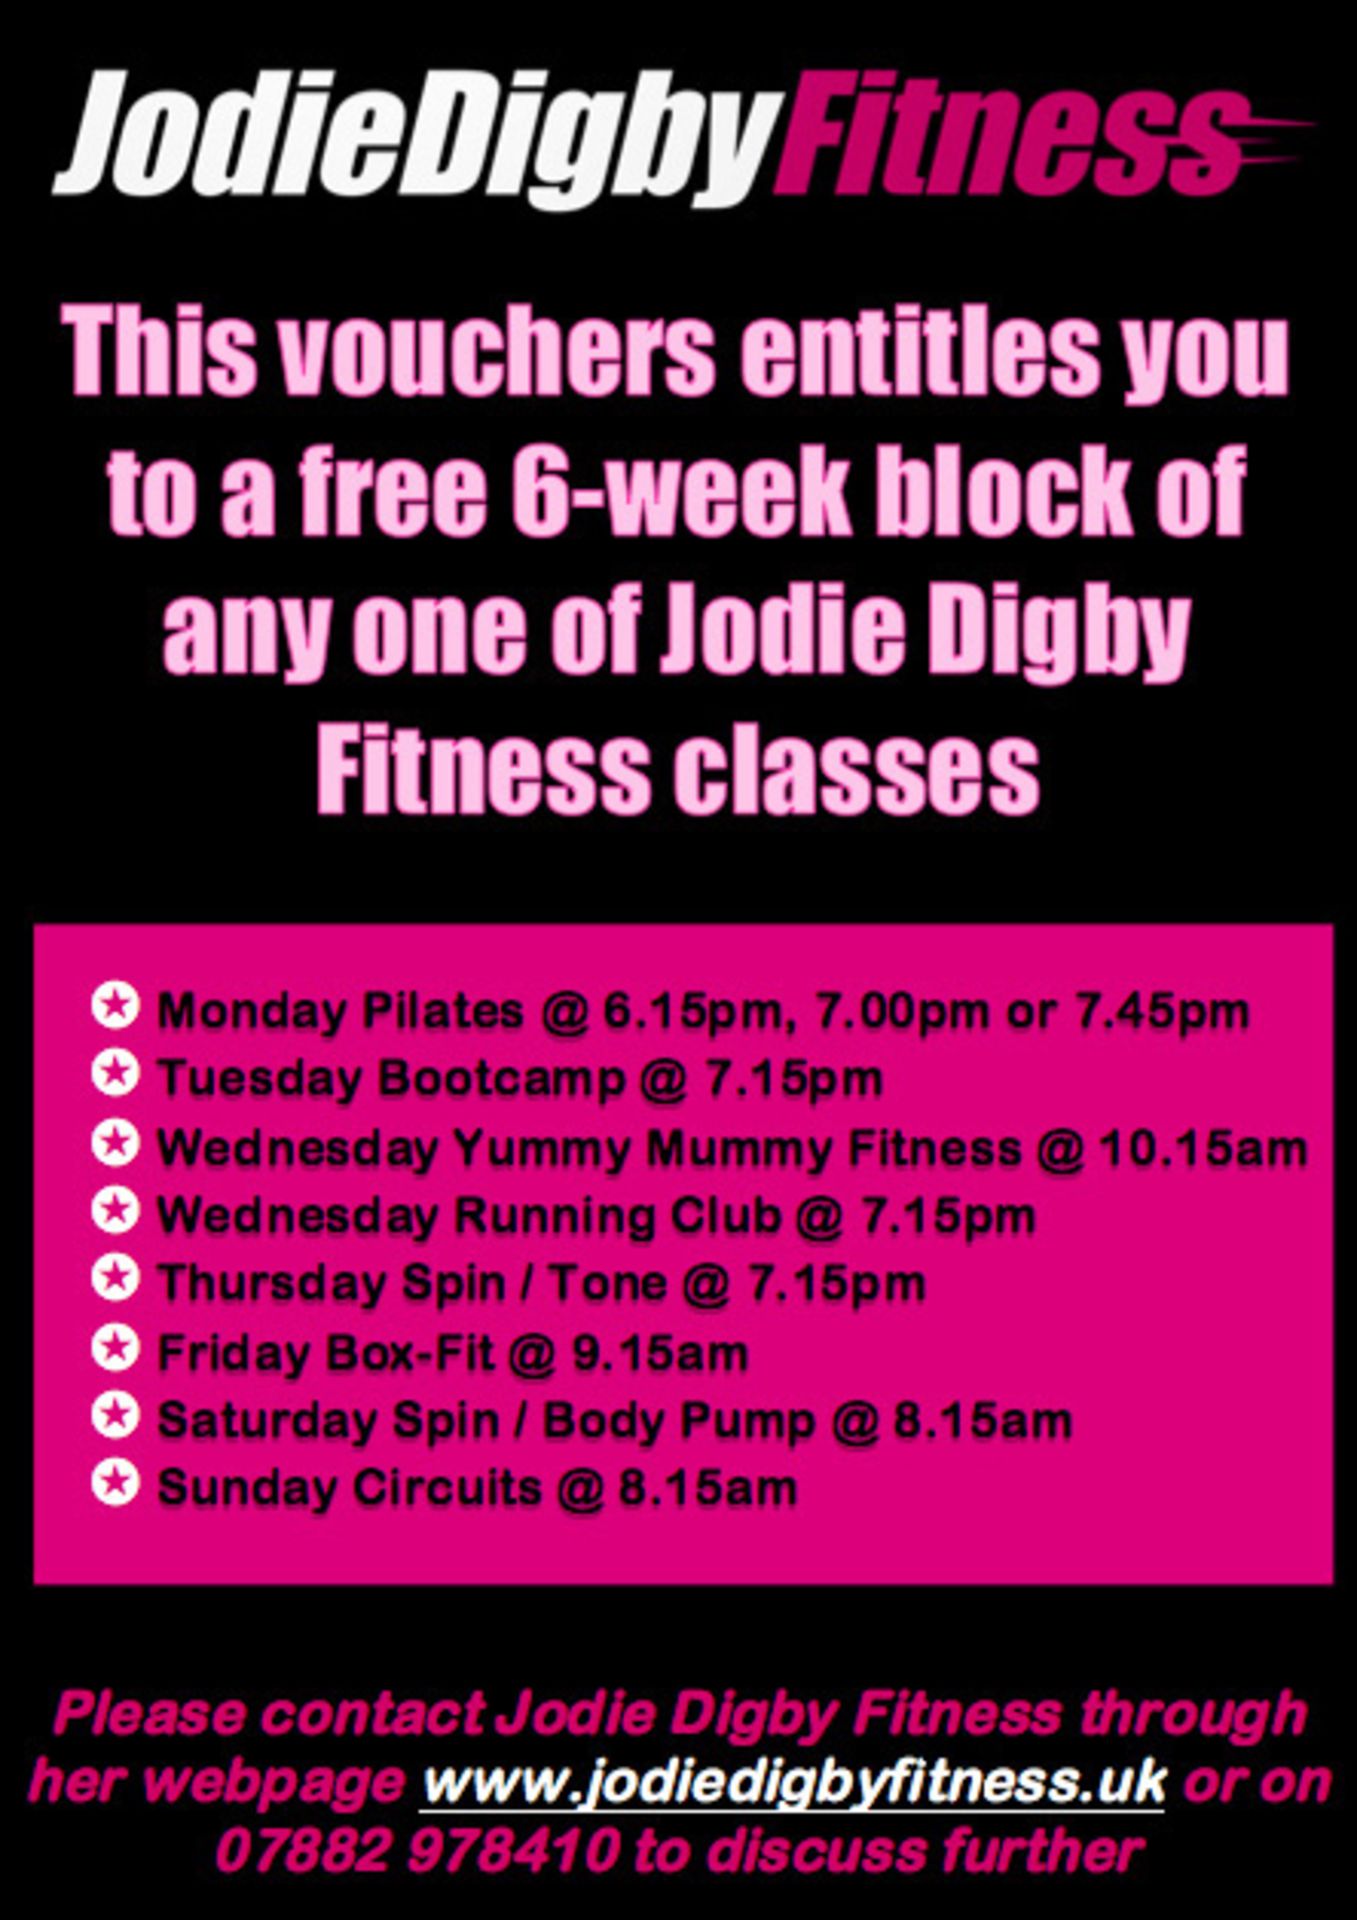 A free 6 week block of any one of Jodie Digby's fitness Classes. See image for details. See http://